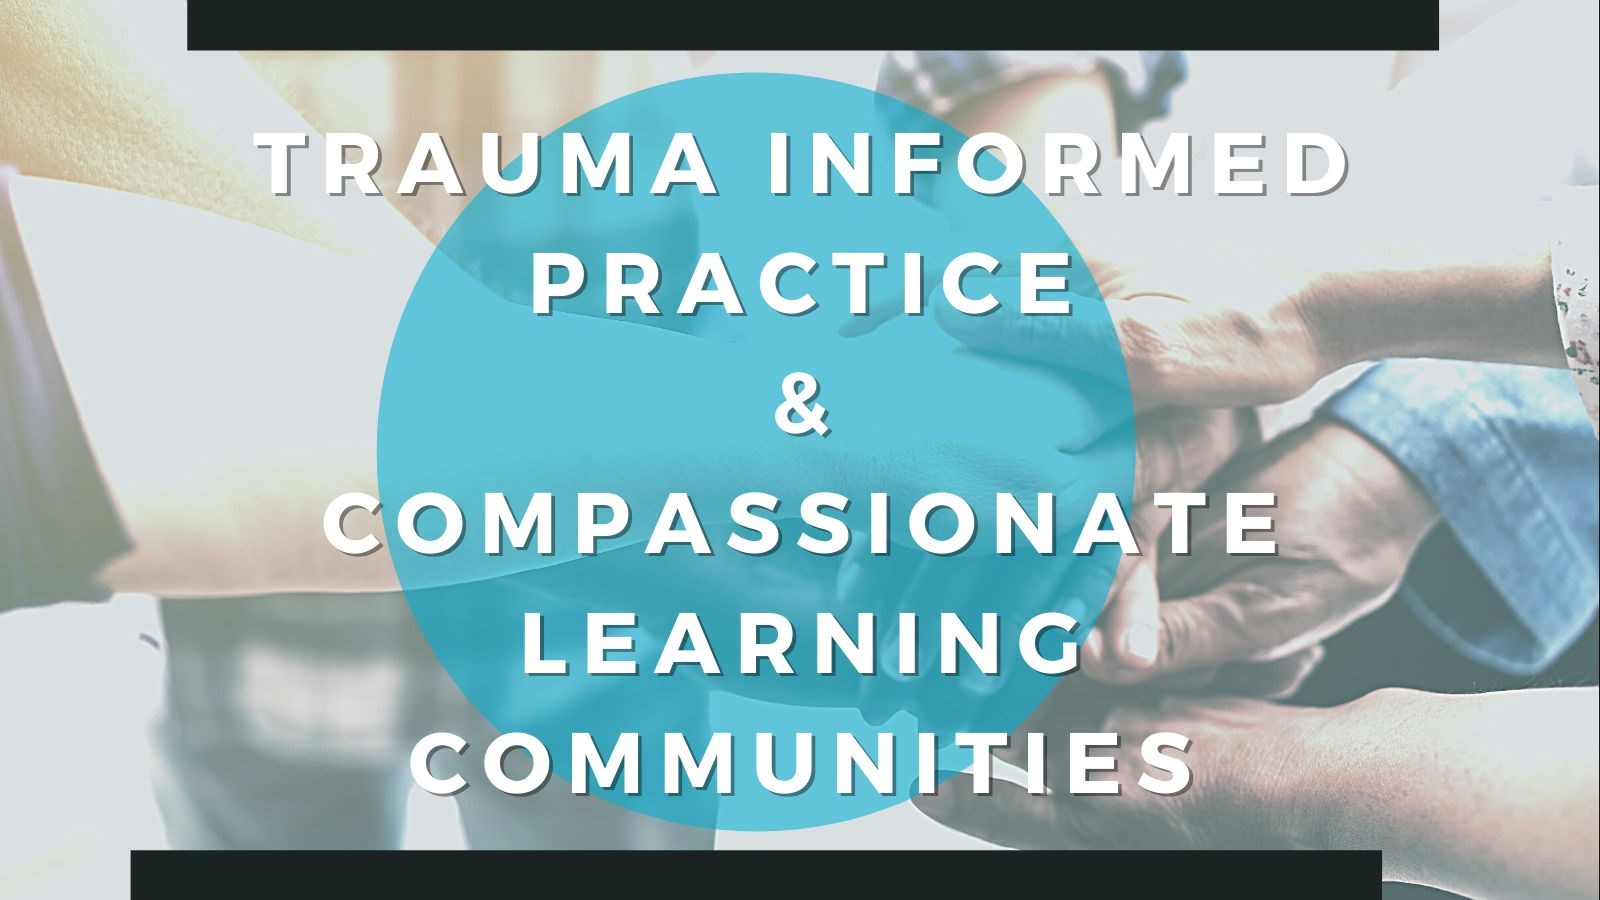 Trauma Informed Practice/ Compassionate Learning Communities